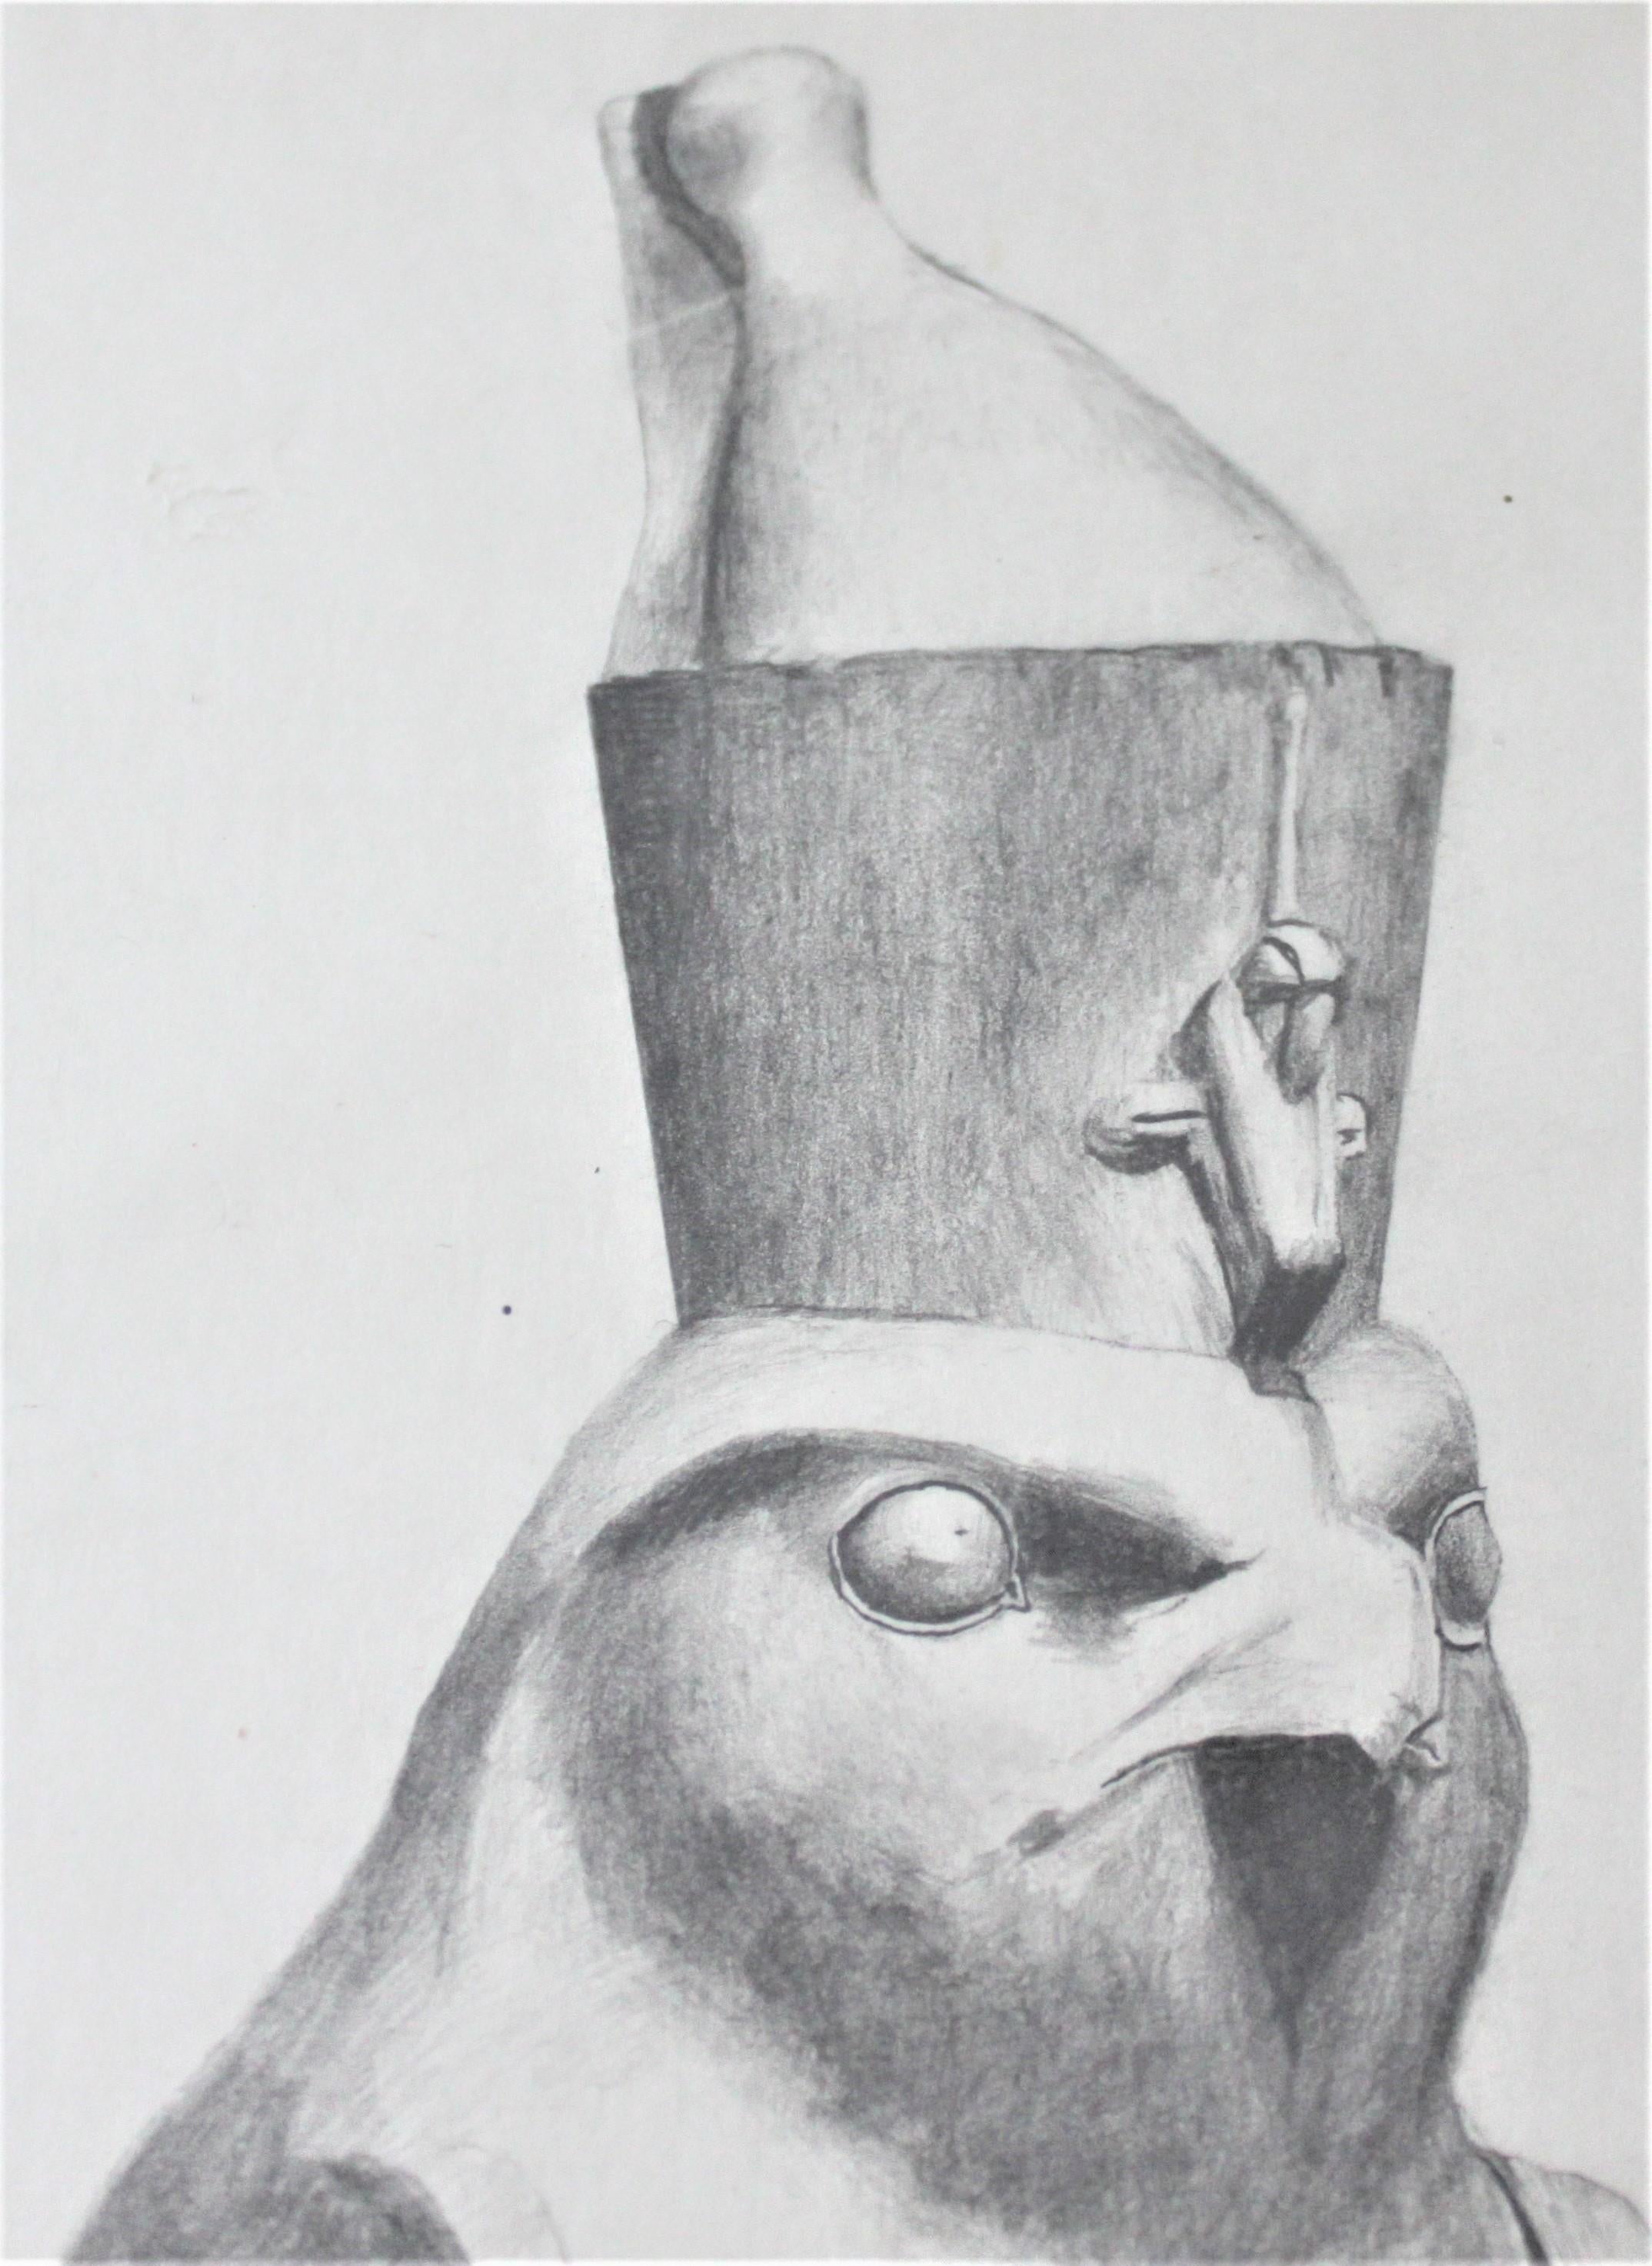 Egyptian Revival Original Edward J. Hughes Pencil Drawing of the Ancient Egyptian Diety Horus